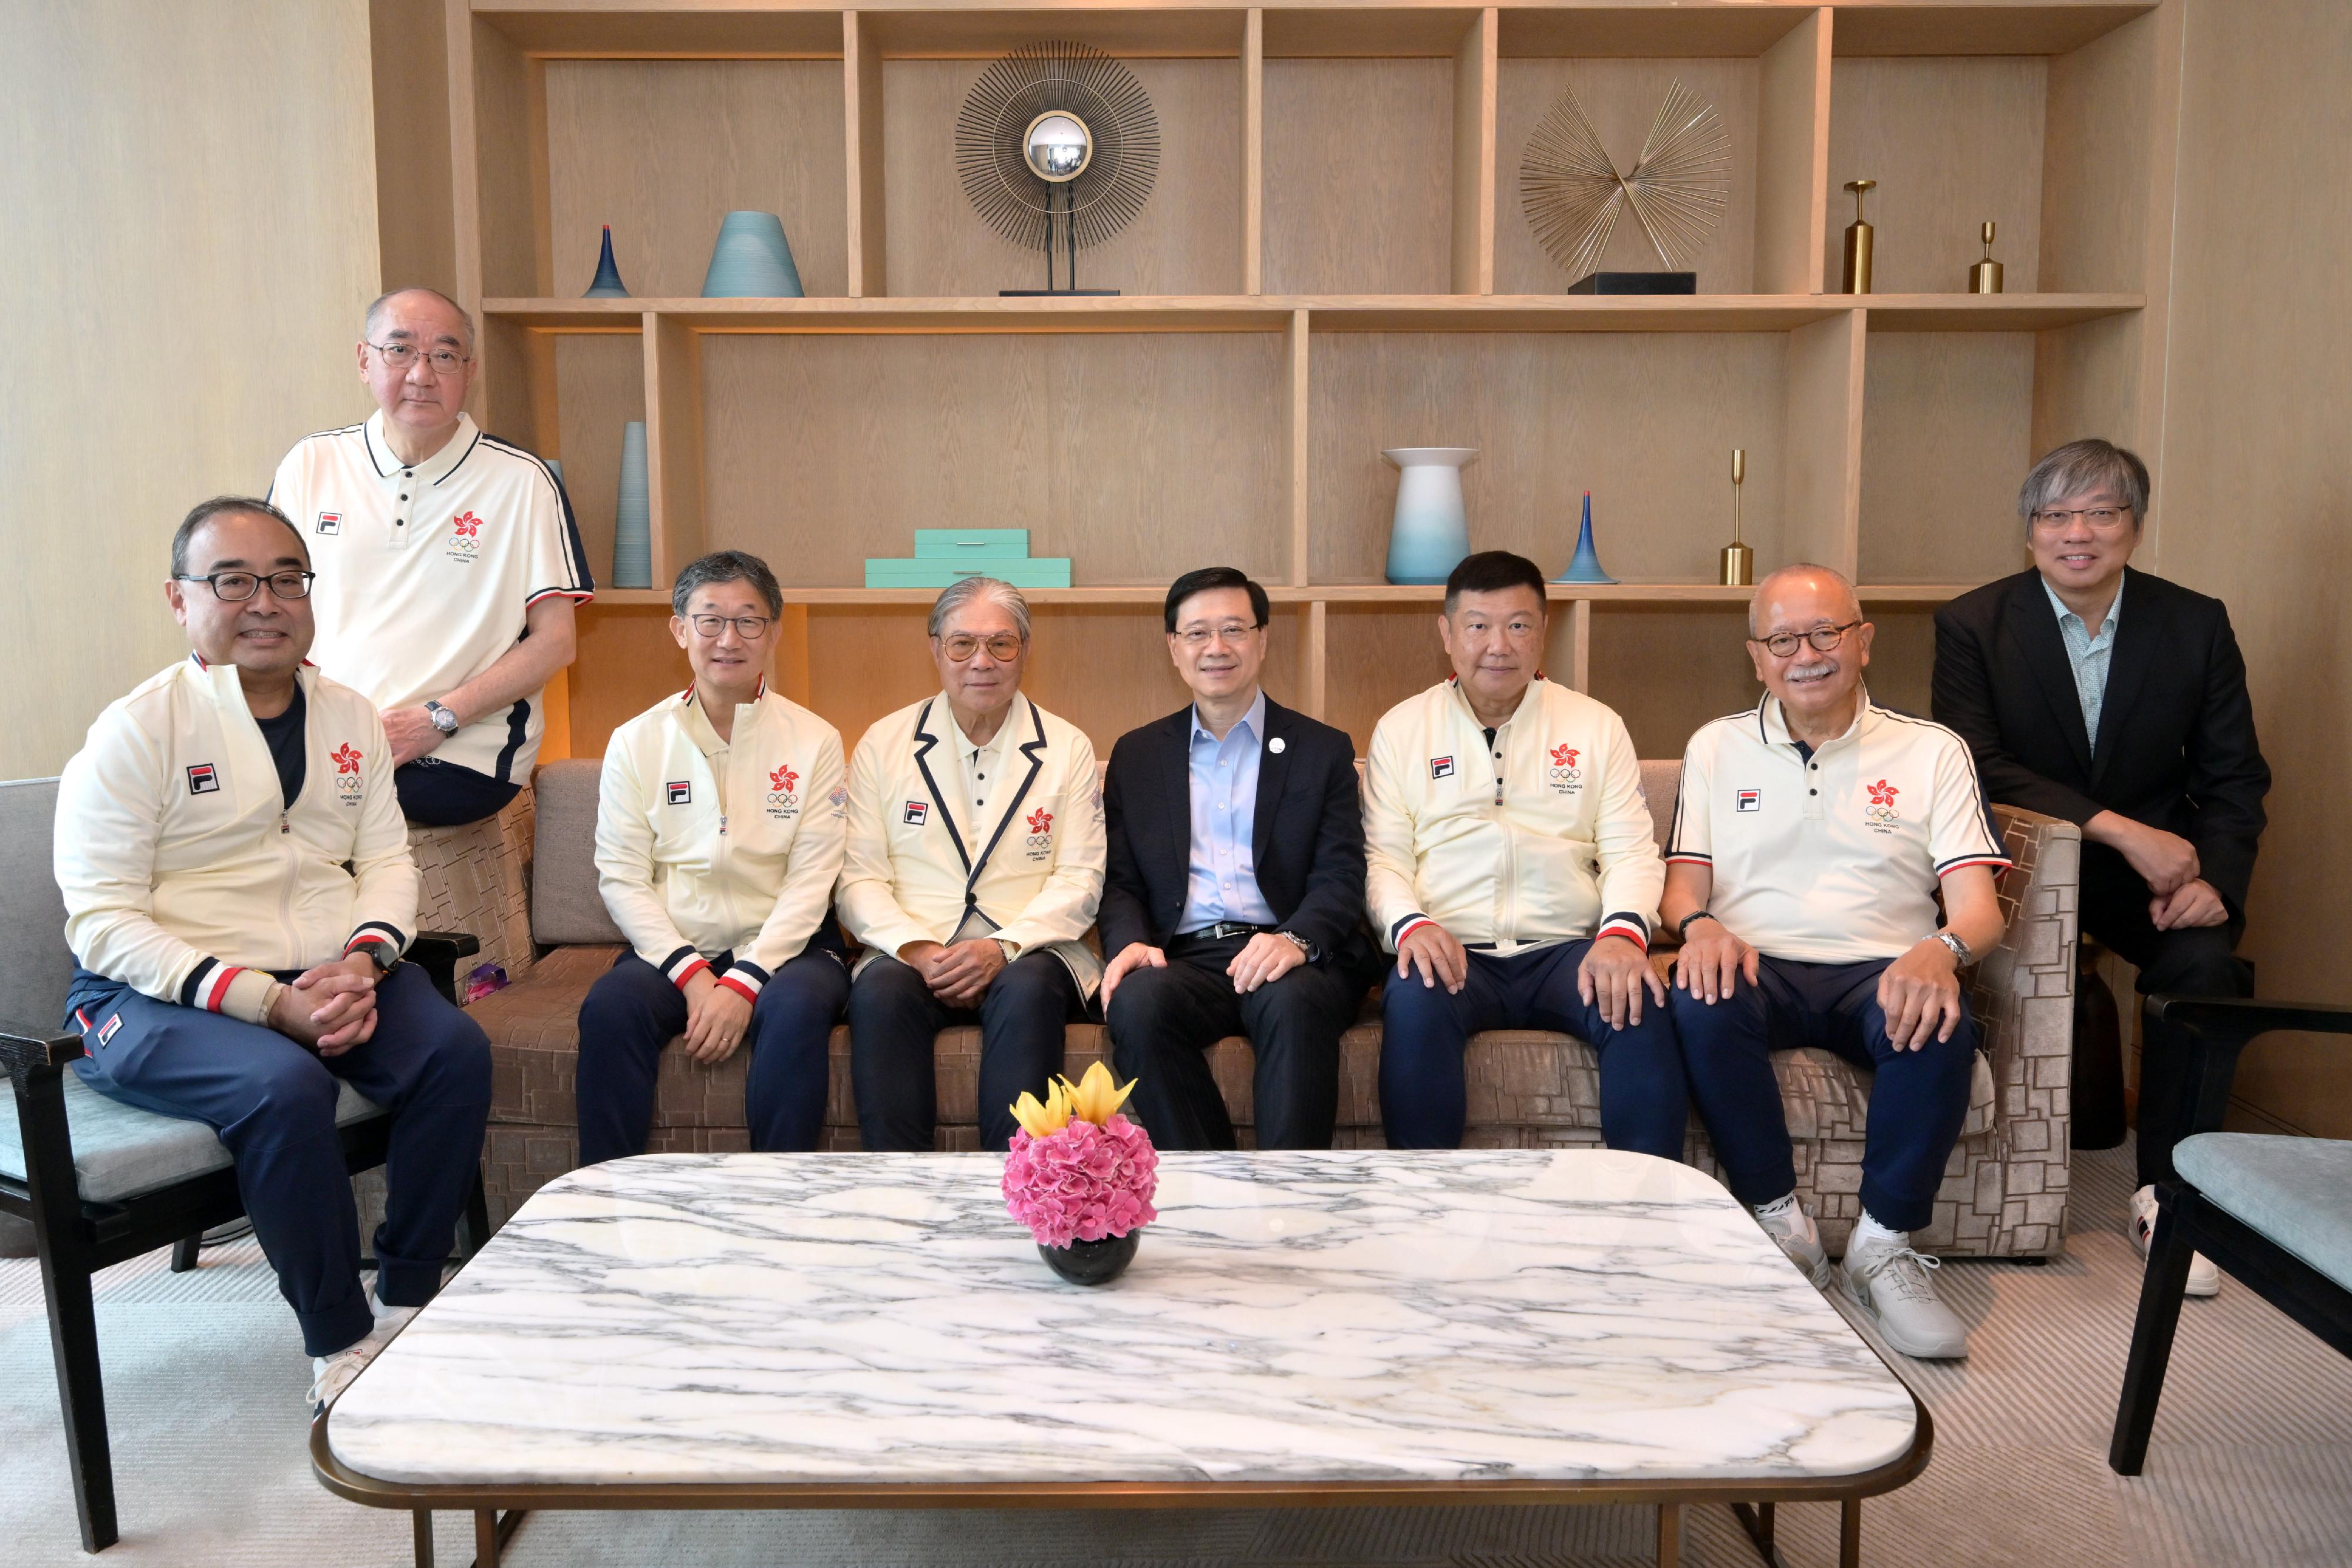 The Chief Executive, Mr John Lee, led a Hong Kong Special Administrative Region Government delegation to Hangzhou and continued his visit programme today (September 24). Photo shows Mr Lee (fourth right); the President of the Sports Federation & Olympic Committee of Hong Kong, China (SF&OC), Mr Timothy Fok (fourth left), and other officers of the SF&OC.
